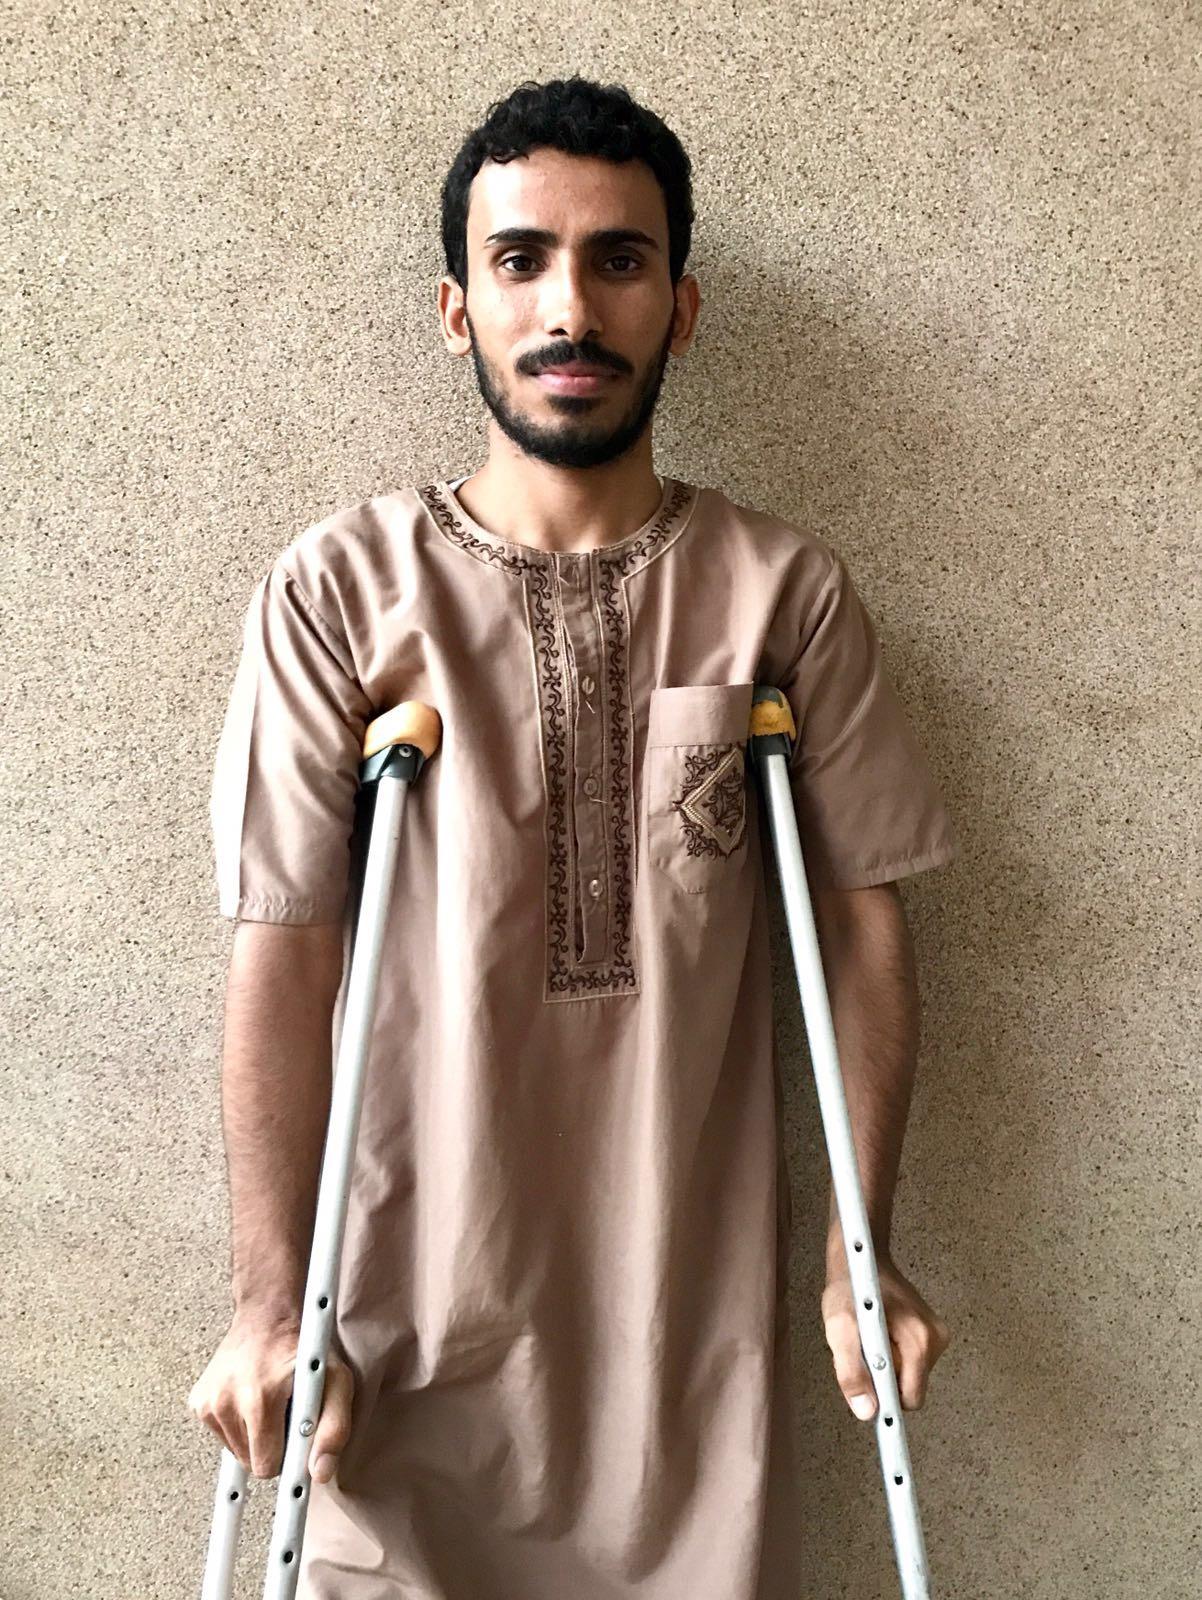 22-year-old Murad Saeed al Adhal’s leg is so severely injured doctors say he needs to have it amputated (Sarah Knuckey)